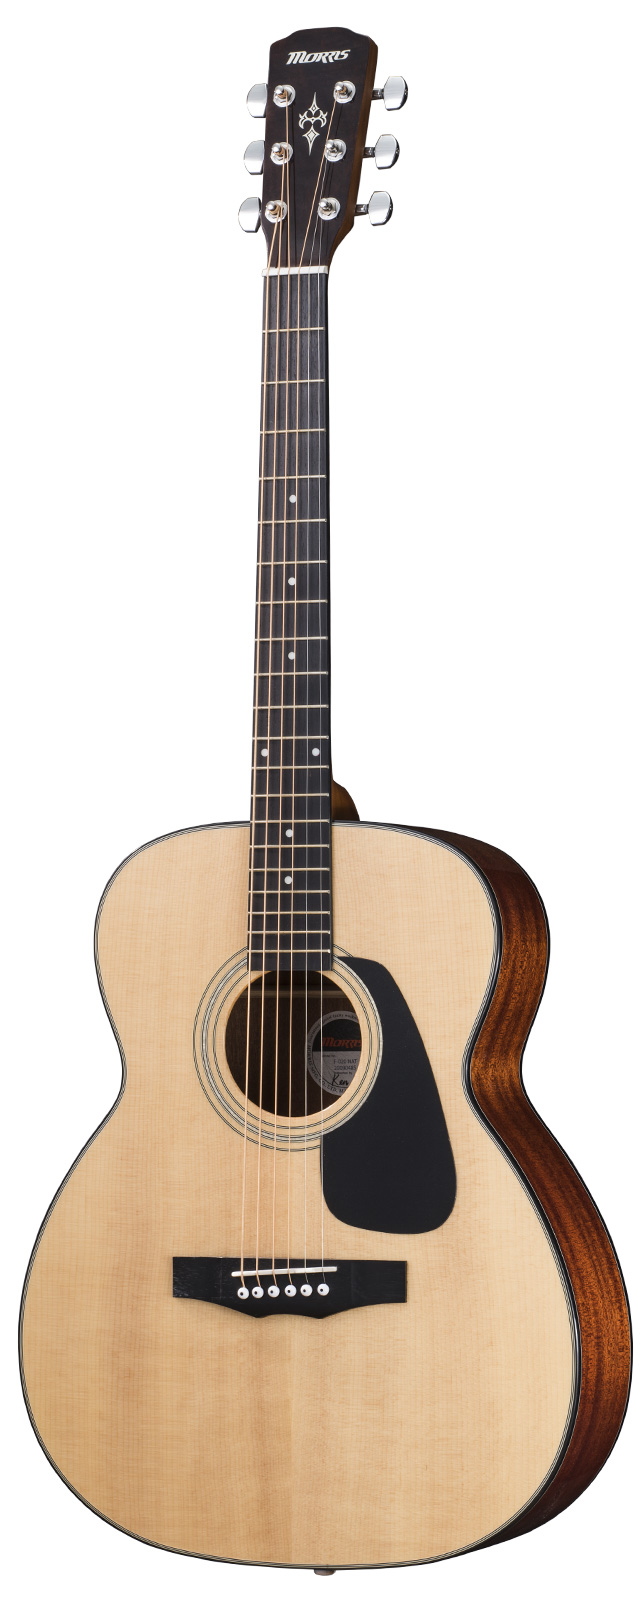 F-020 | PERFORMERS EDITION | MORRIS GUITARS モーリスギター